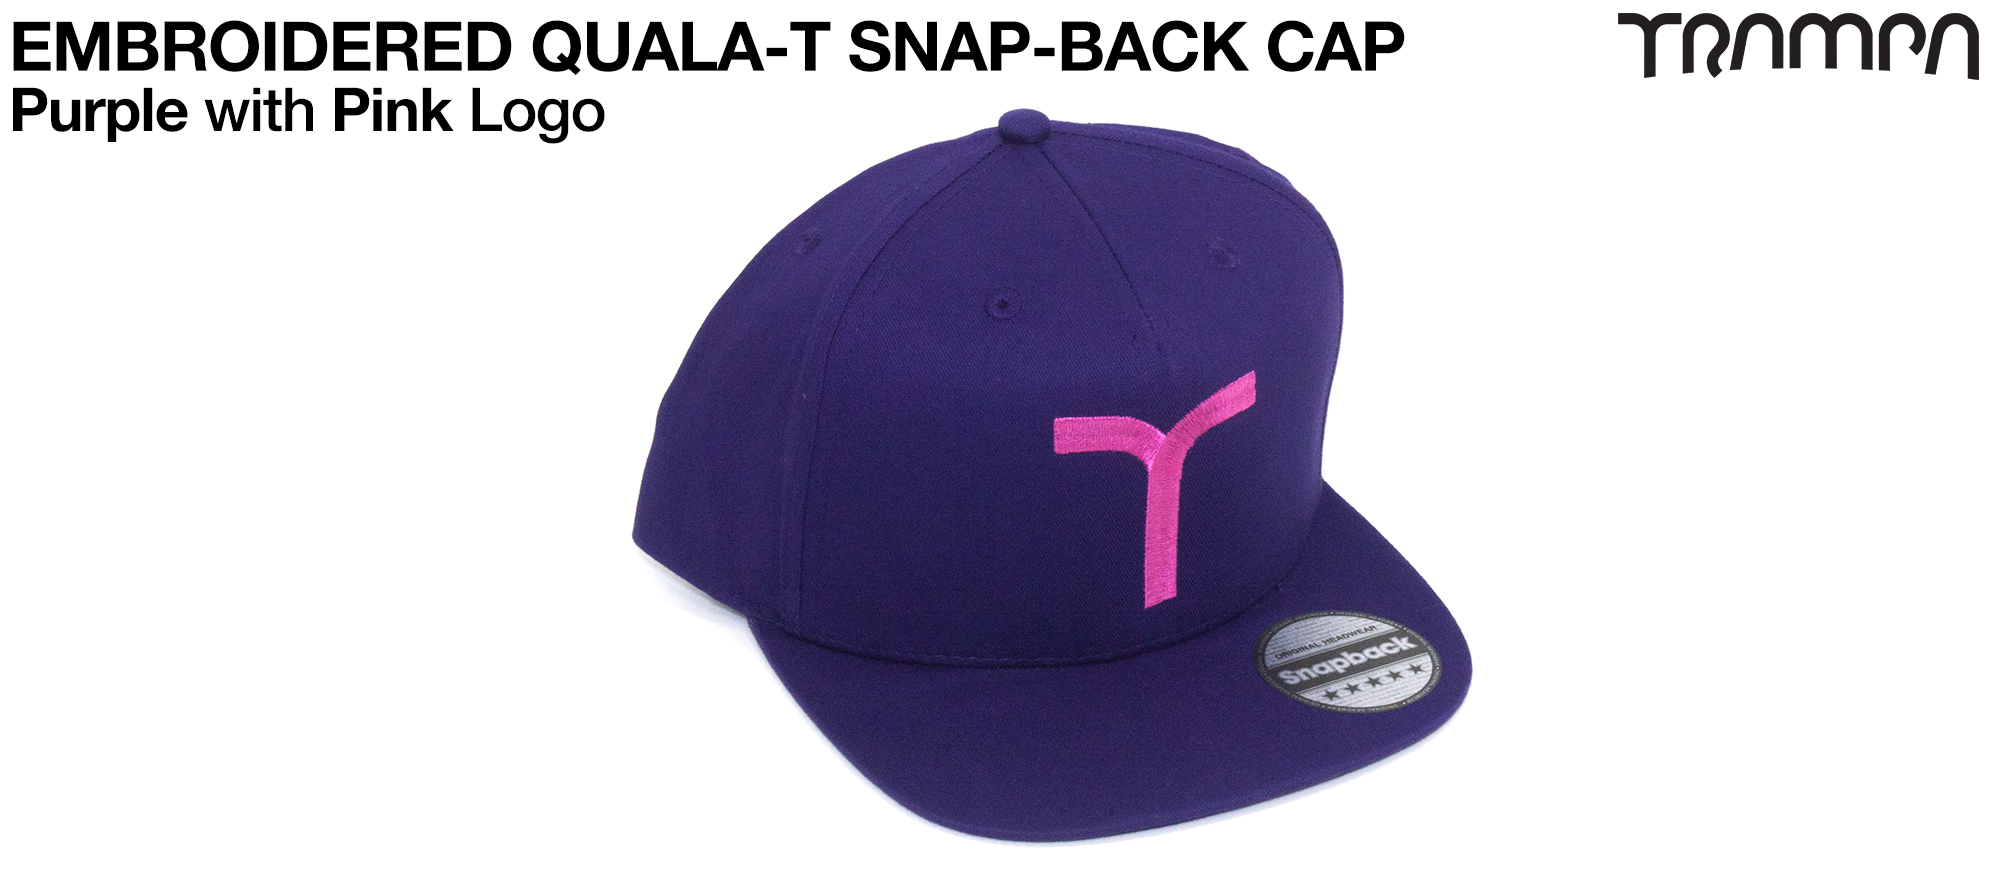 PURPLE SNAPBACK Cap with PINK QUALA-T logo embroidered 